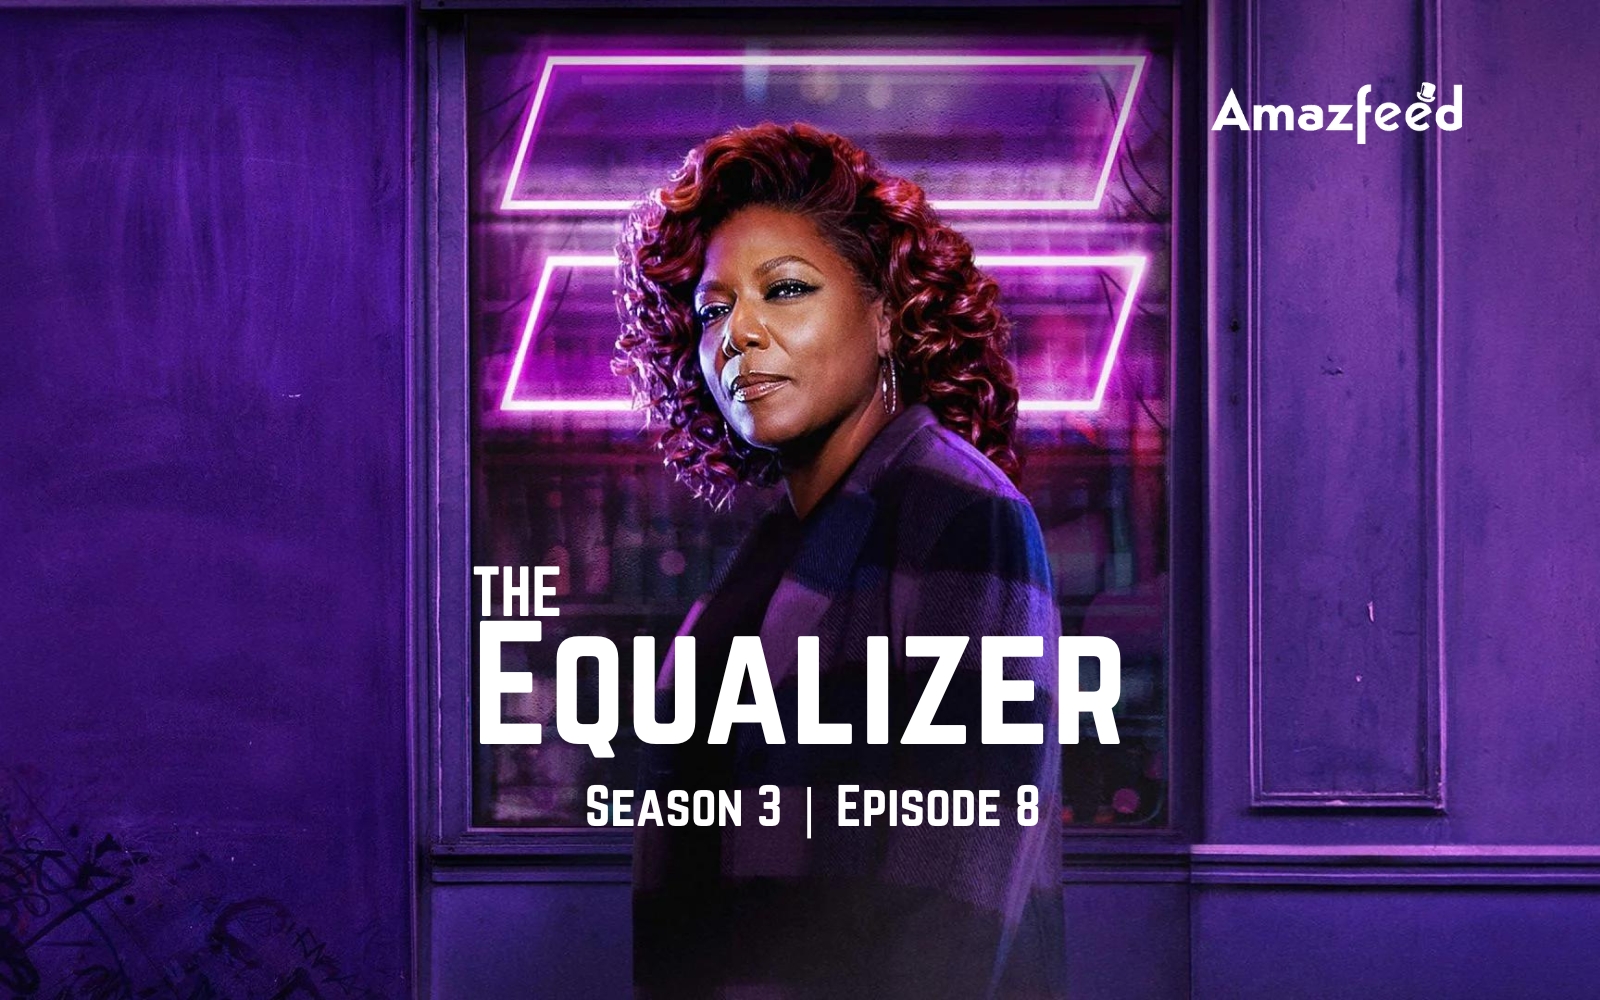 The Equalizer Season 3 Episode 8 Release Date, Countdown, Spoilers